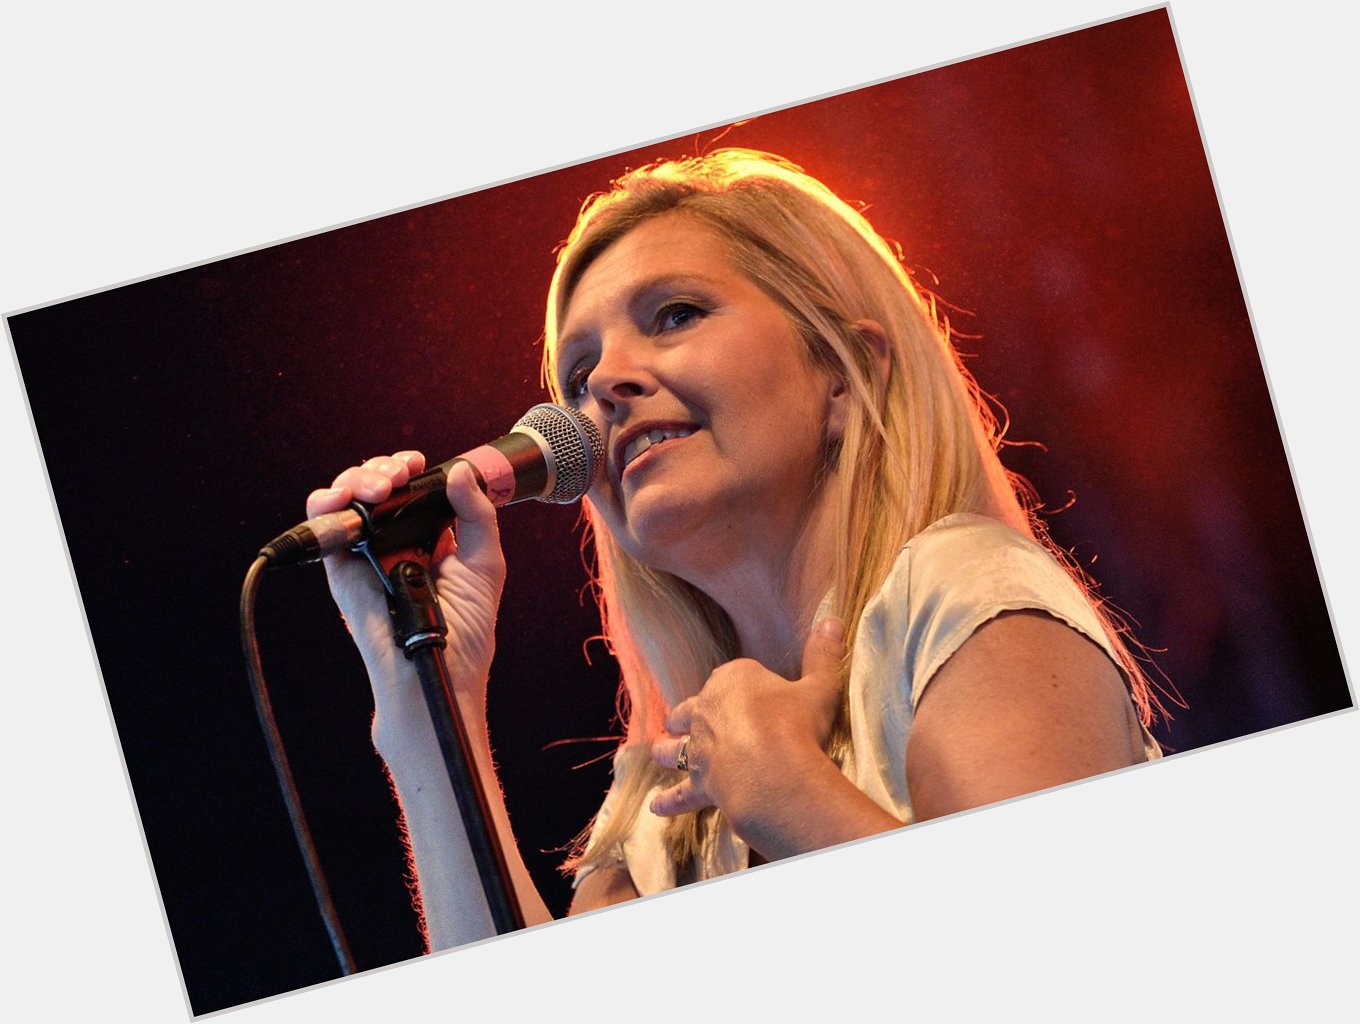 Insomniac\s Playlist- Happy Birthday Sarah Cracknell! We\re celebrating with 5 of her songs  